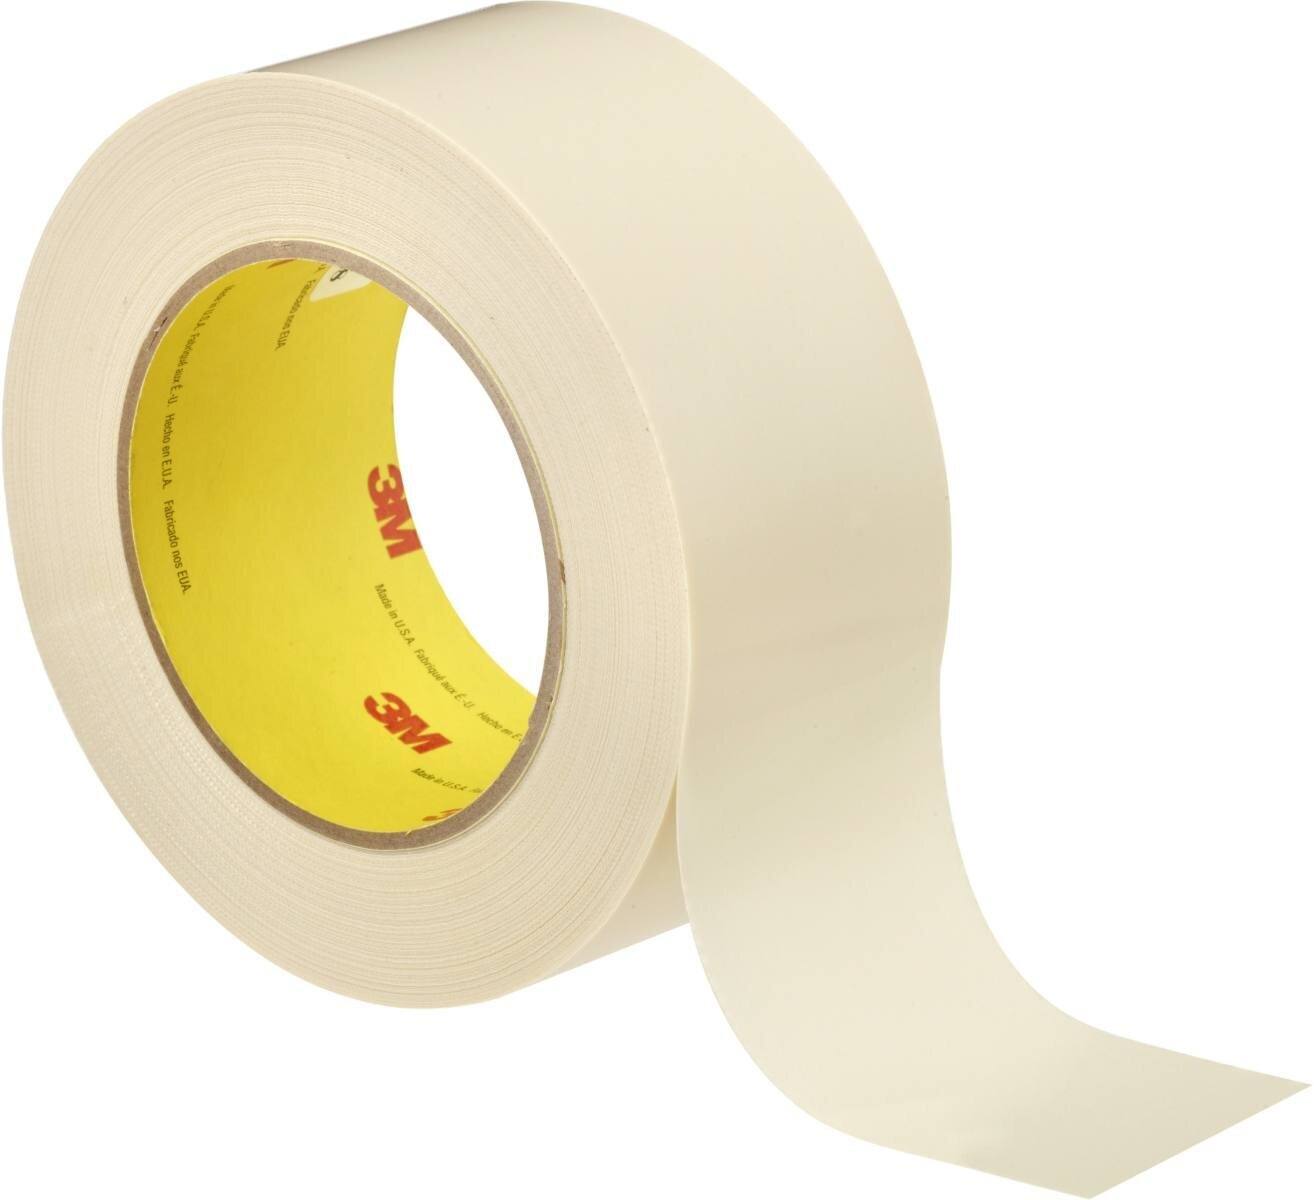 3M 5401 Traction Tape 609mmx33m